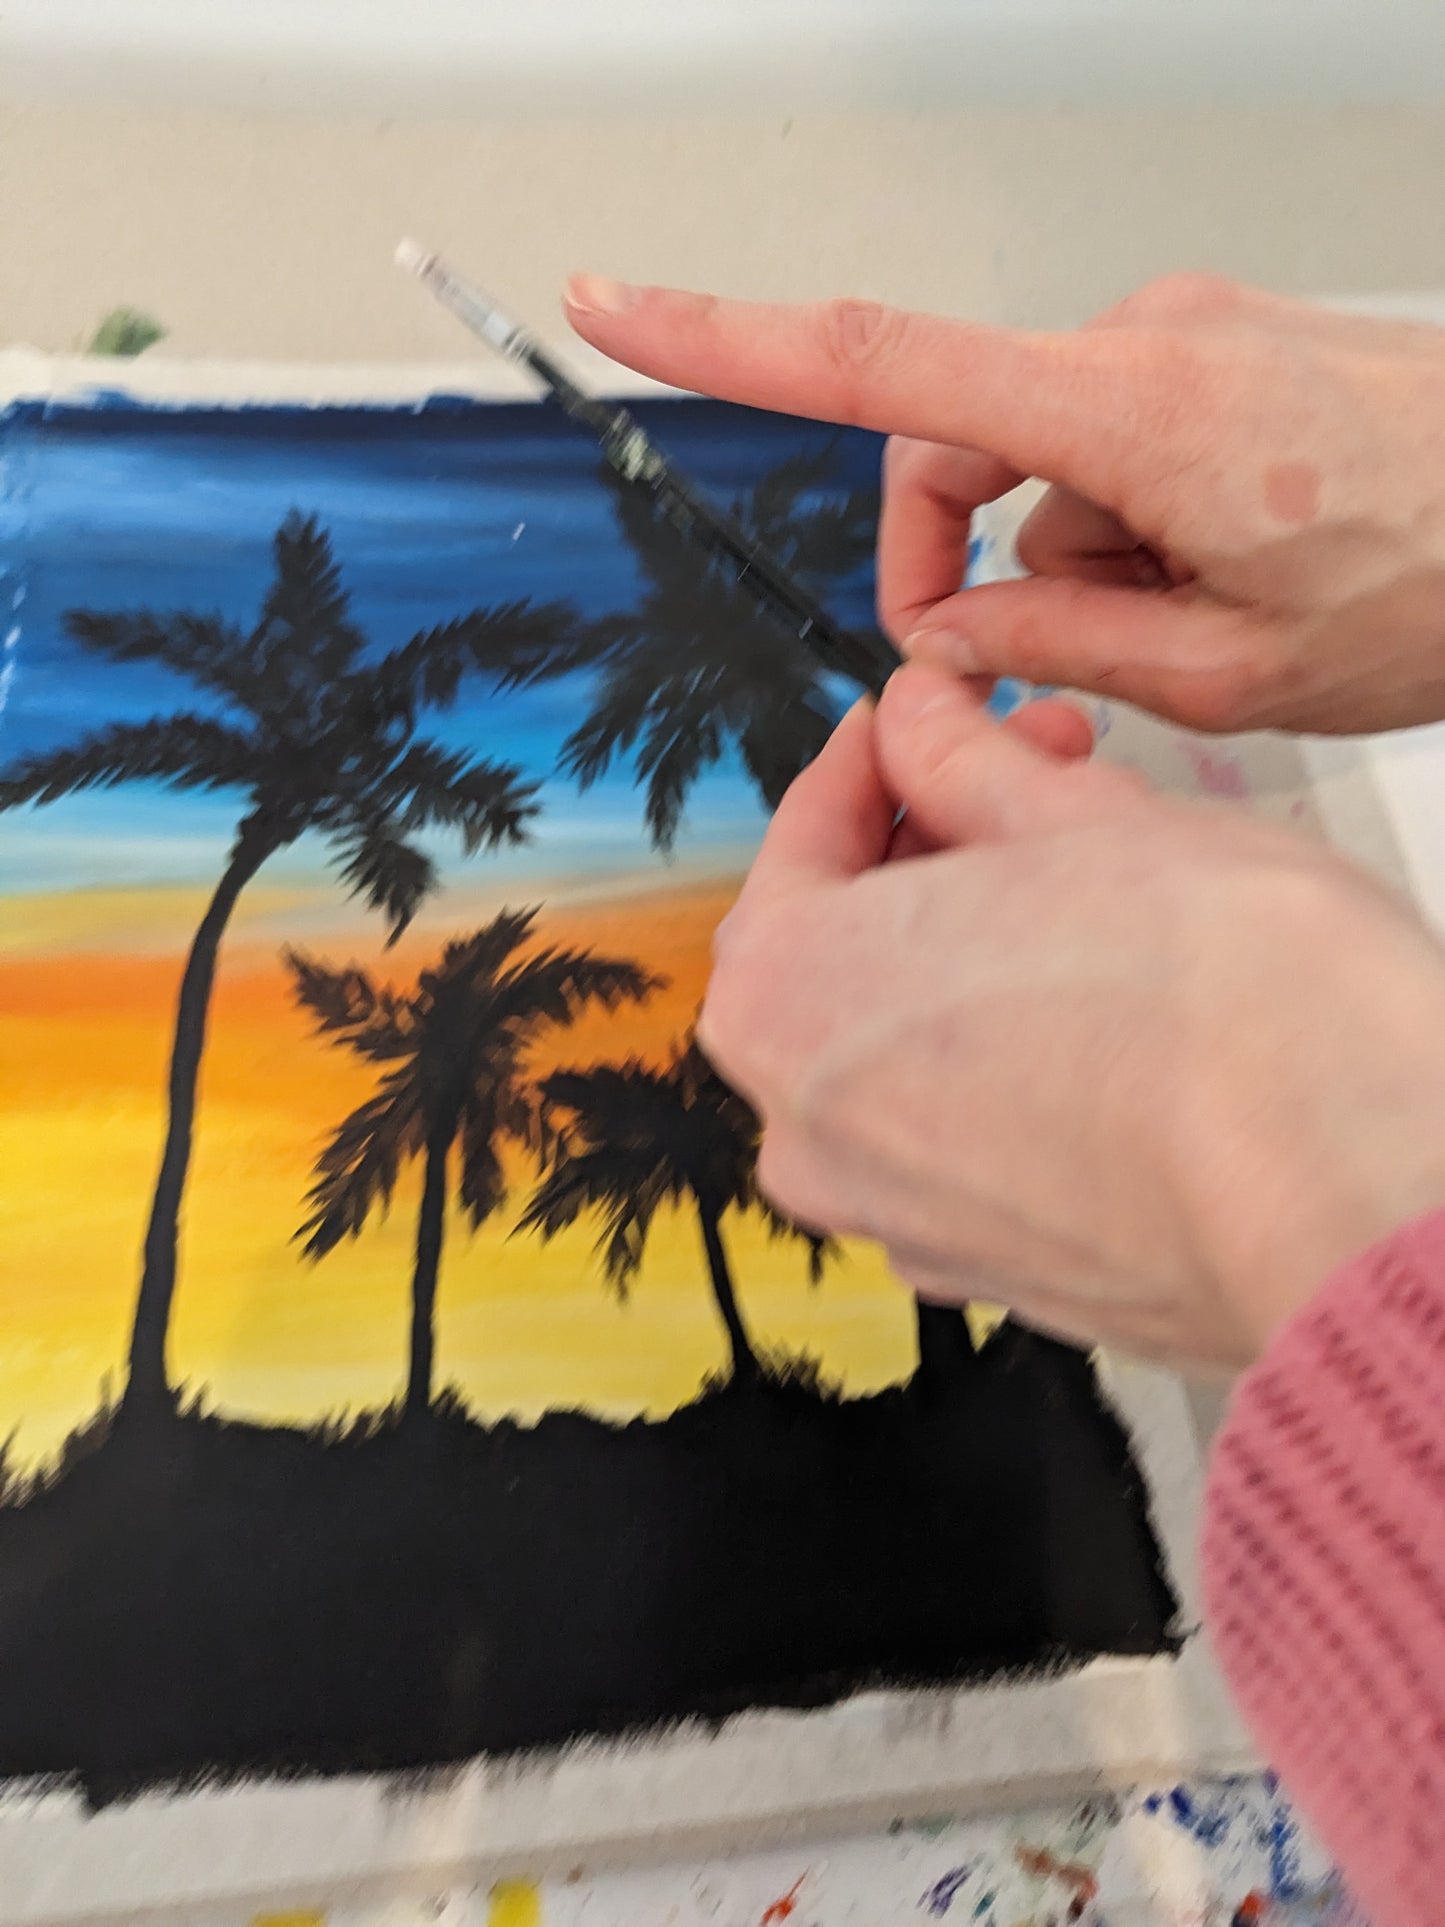 SILHOUETTE SUNSET - Painting Workshop at The Catcher in The Rye Pub, Finchley, London - 27th February 2024, 7.30pm